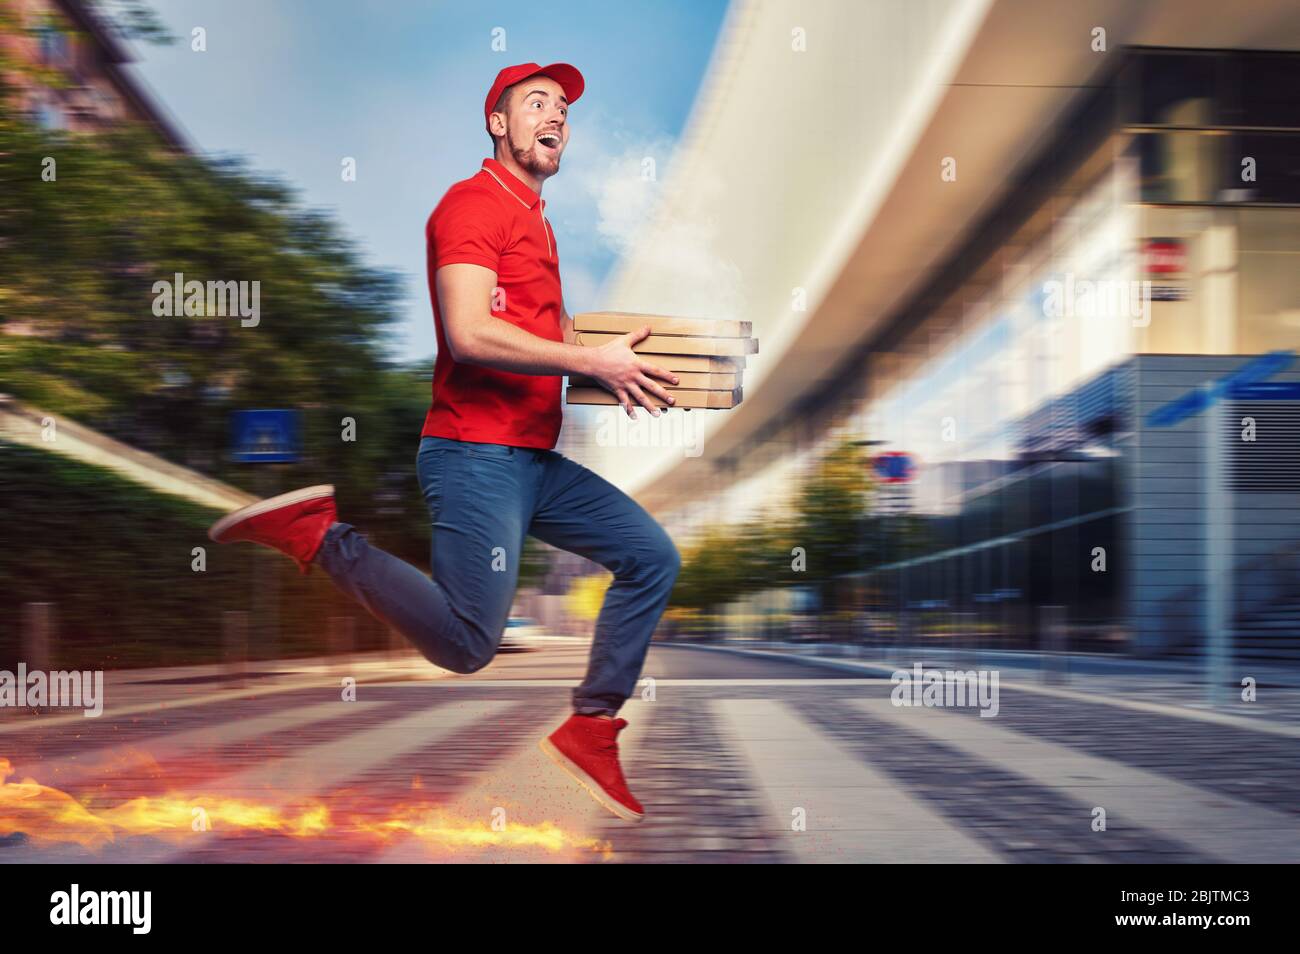 Messenger in red uniform runs on foot really fast to deliver quickly hot pizzas just baked Stock Photo